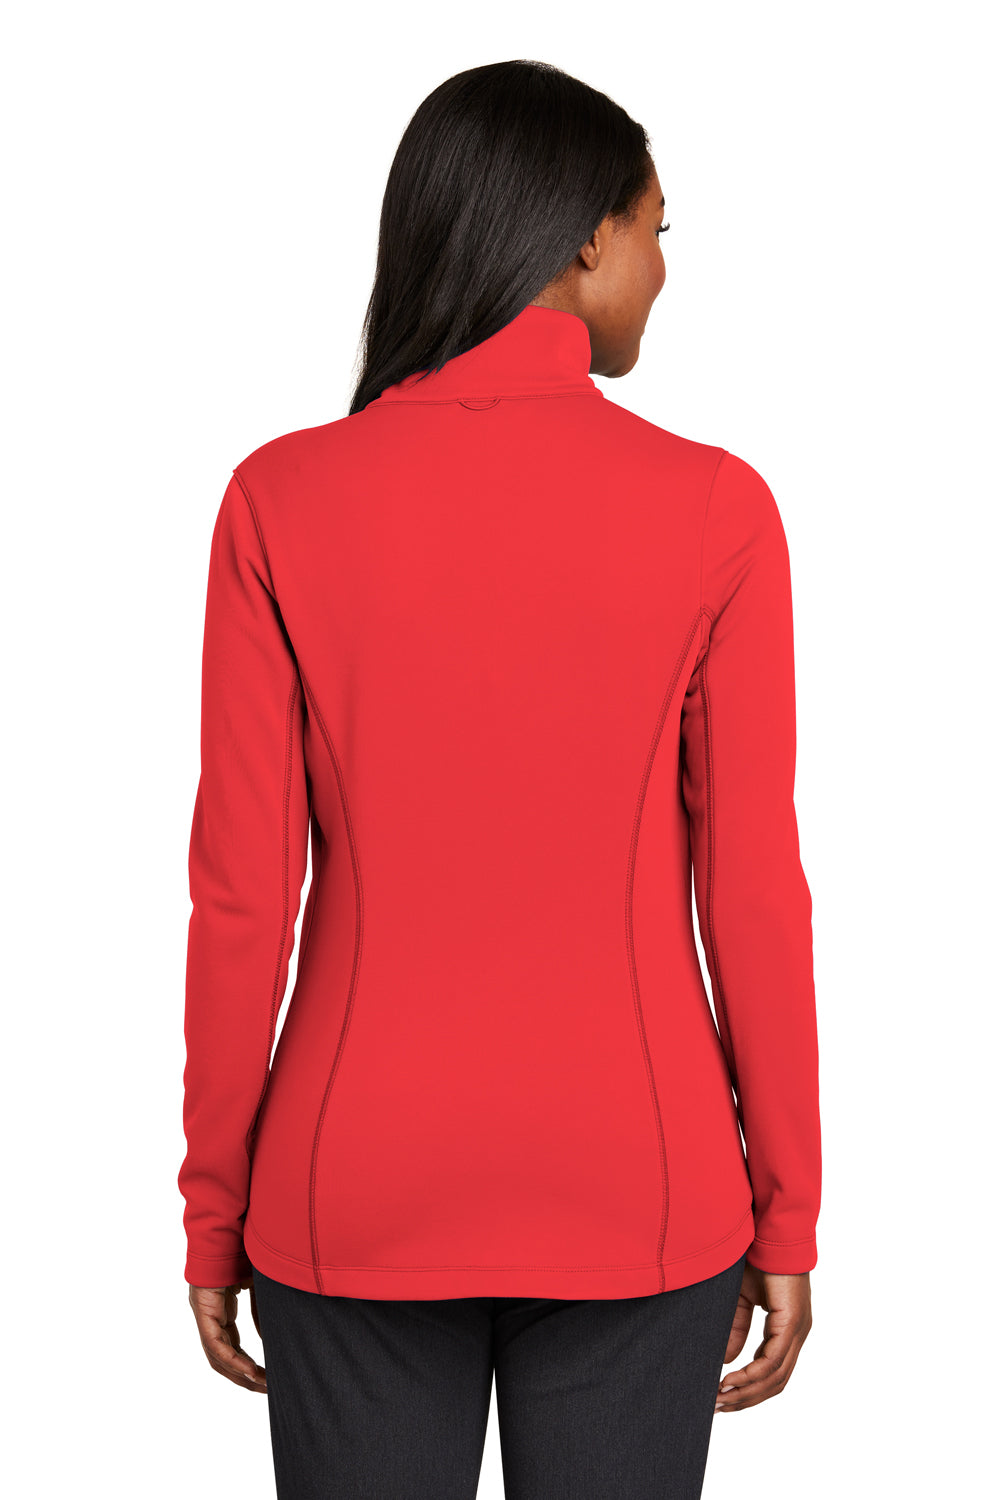 Port Authority L904 Womens Collective Full Zip Smooth Fleece Jacket Pepper Red Back